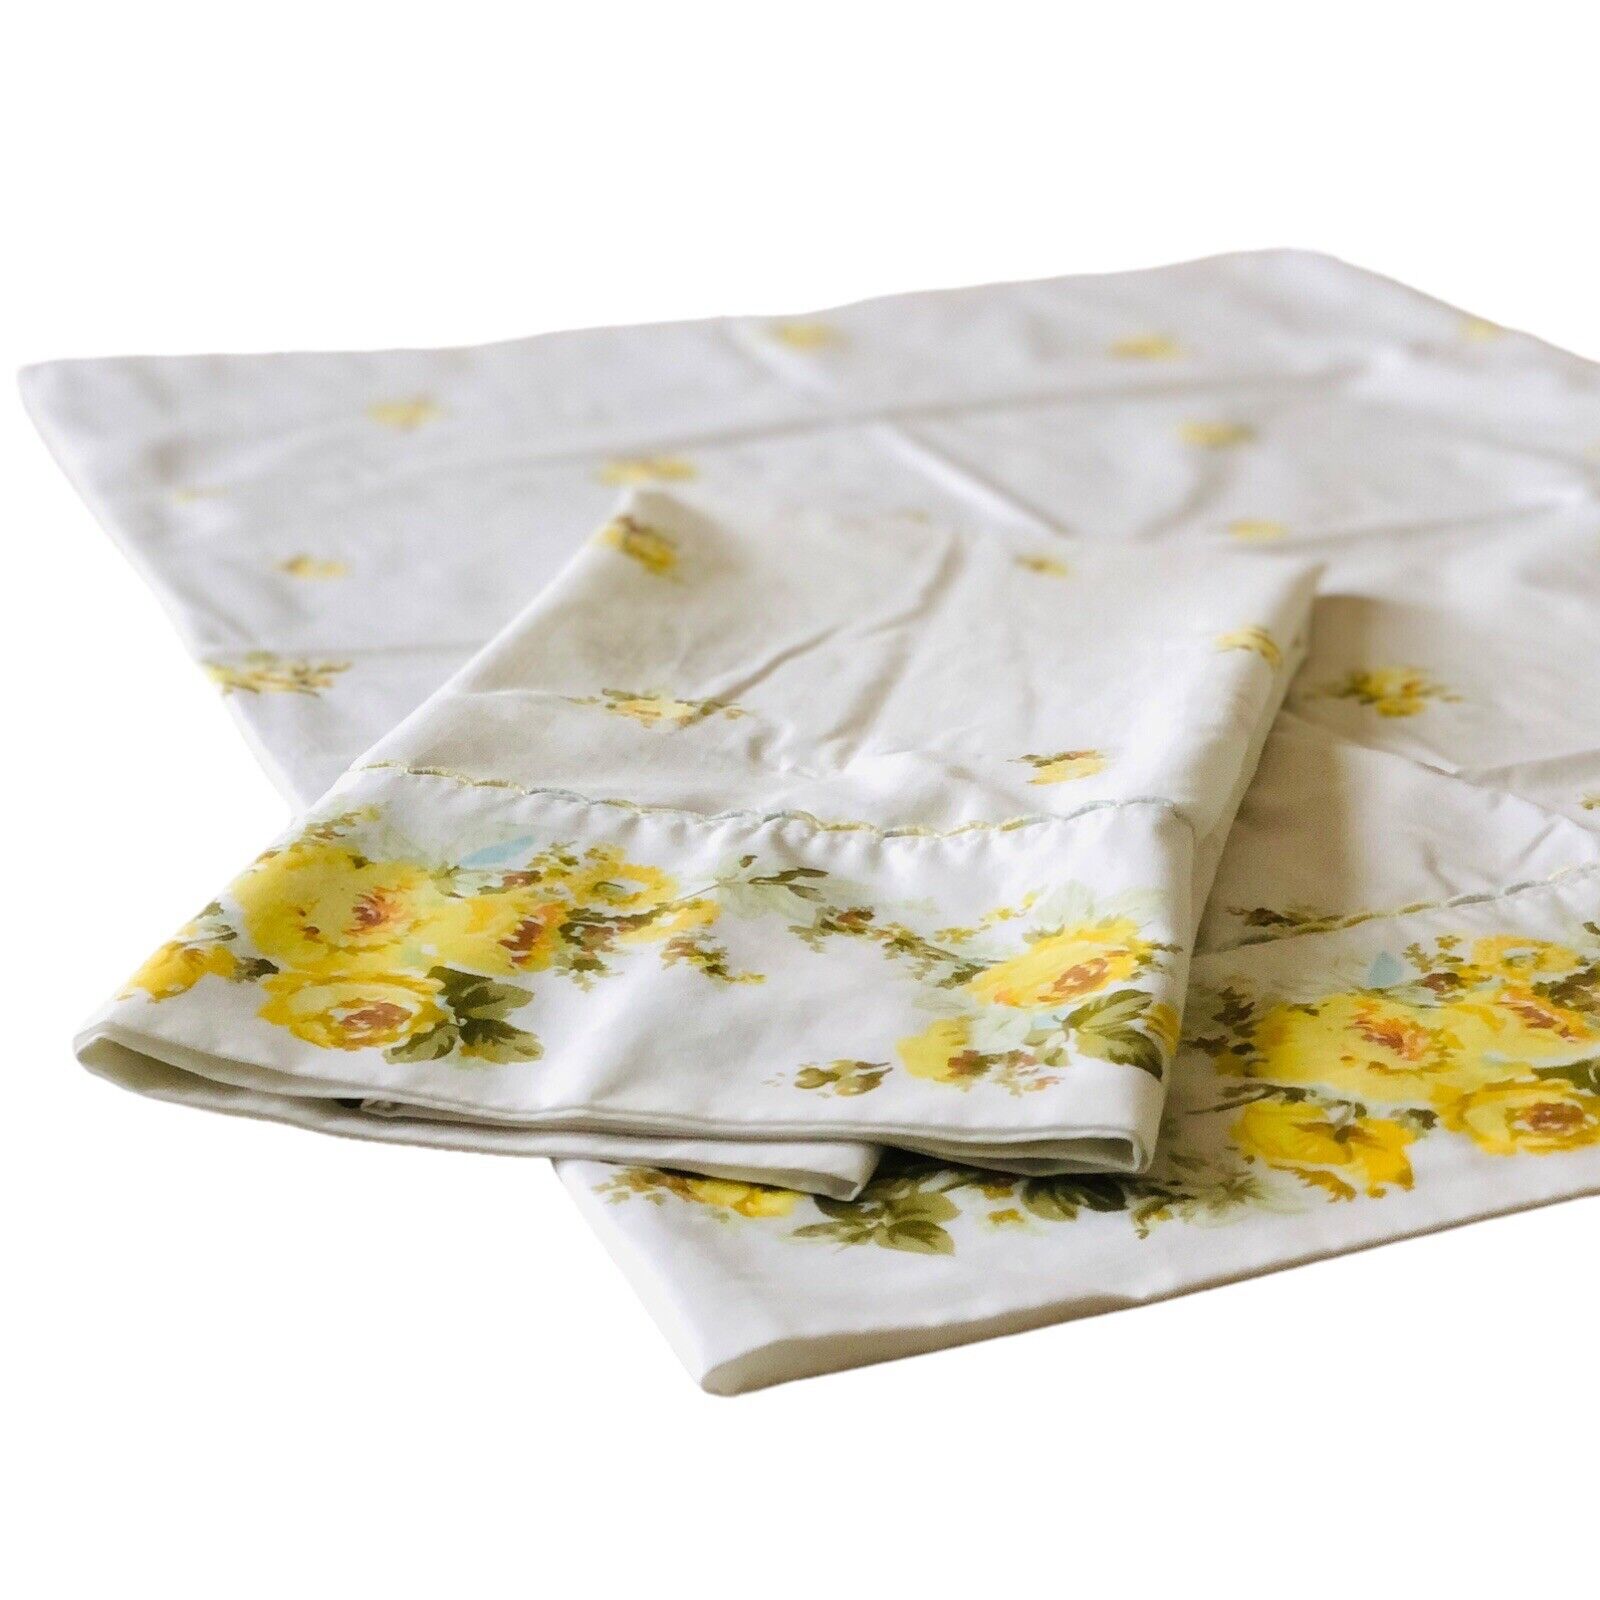 2 VTG Sears Perma-Prest Percale Queen Pillowcases Yellow Rose Floral Scallop Set